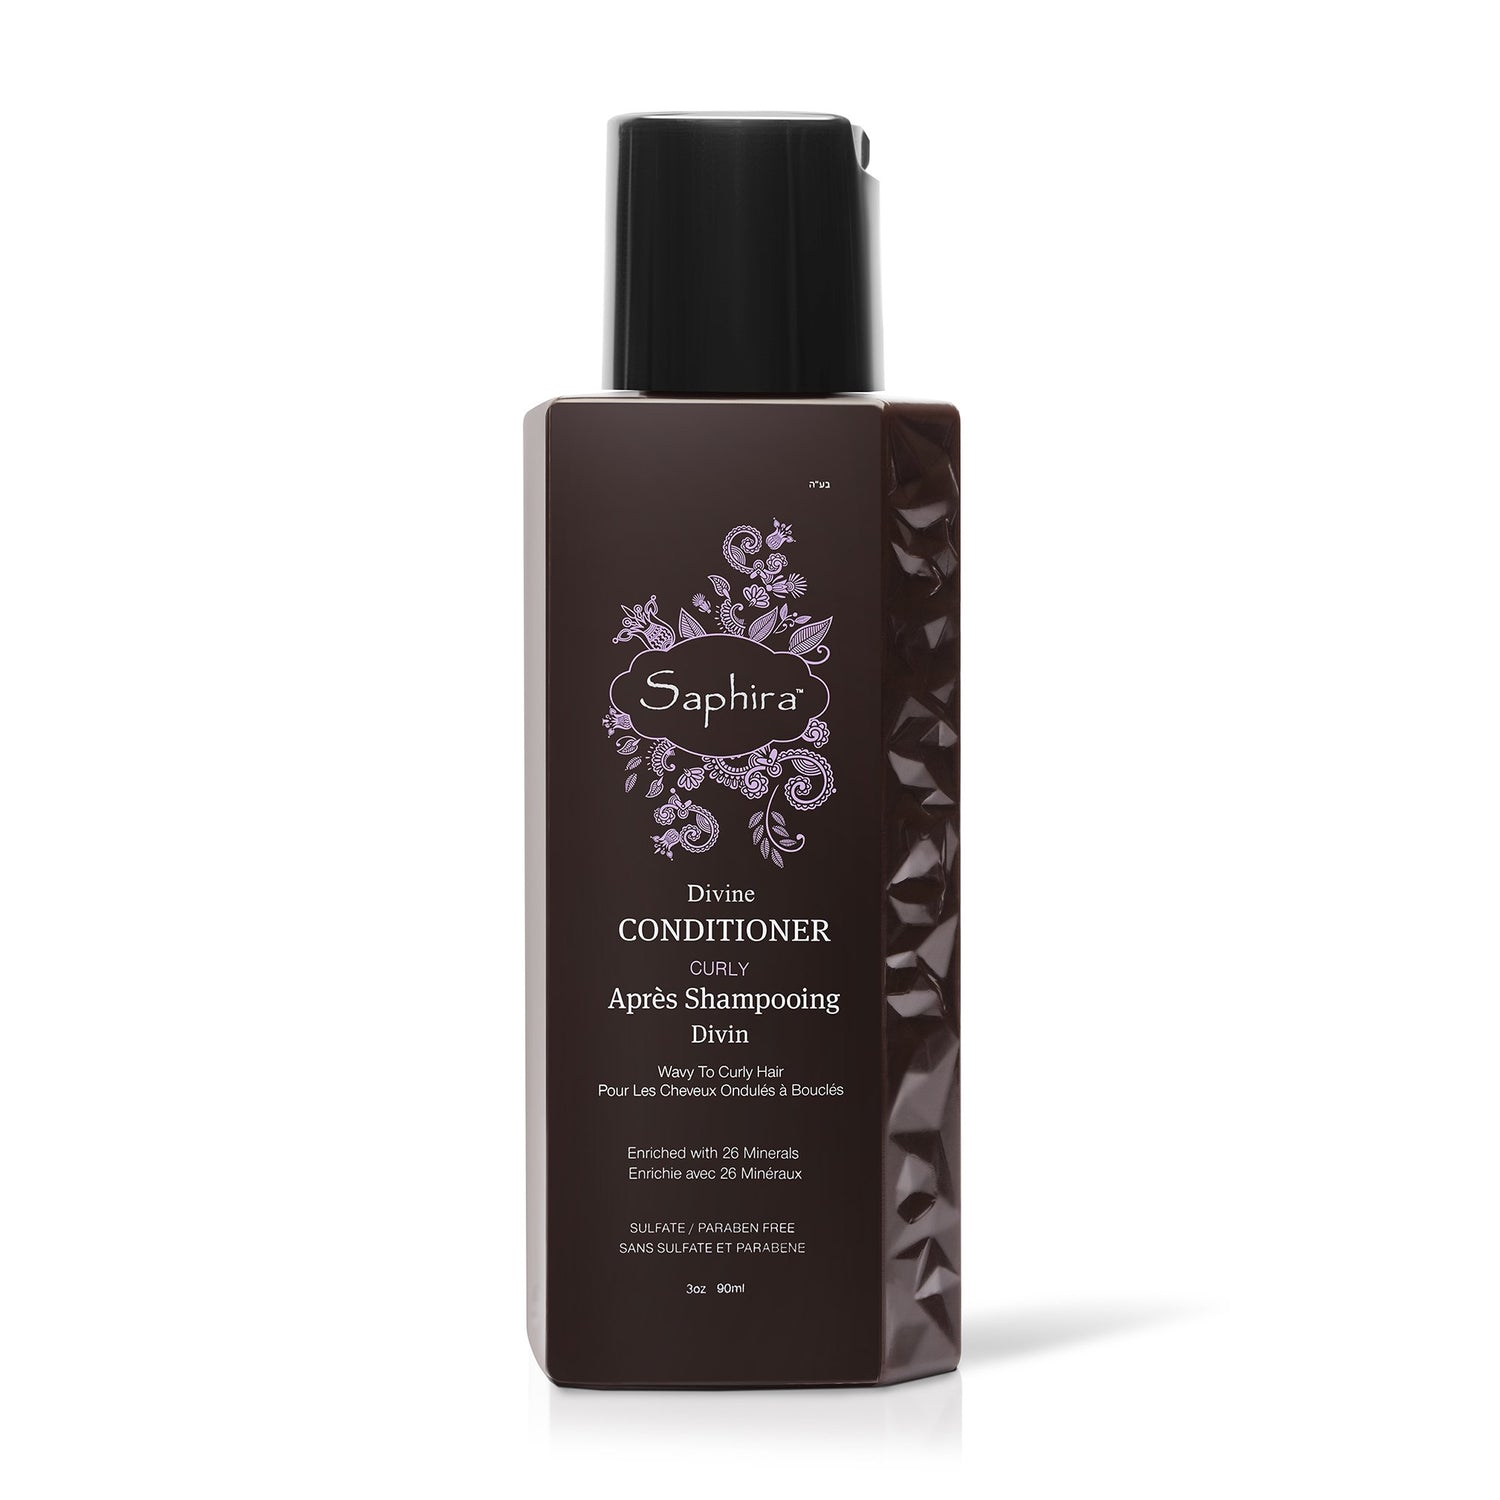 Saphira Divine Curls Conditioner for Curly to Wavy Hair, 3 oz